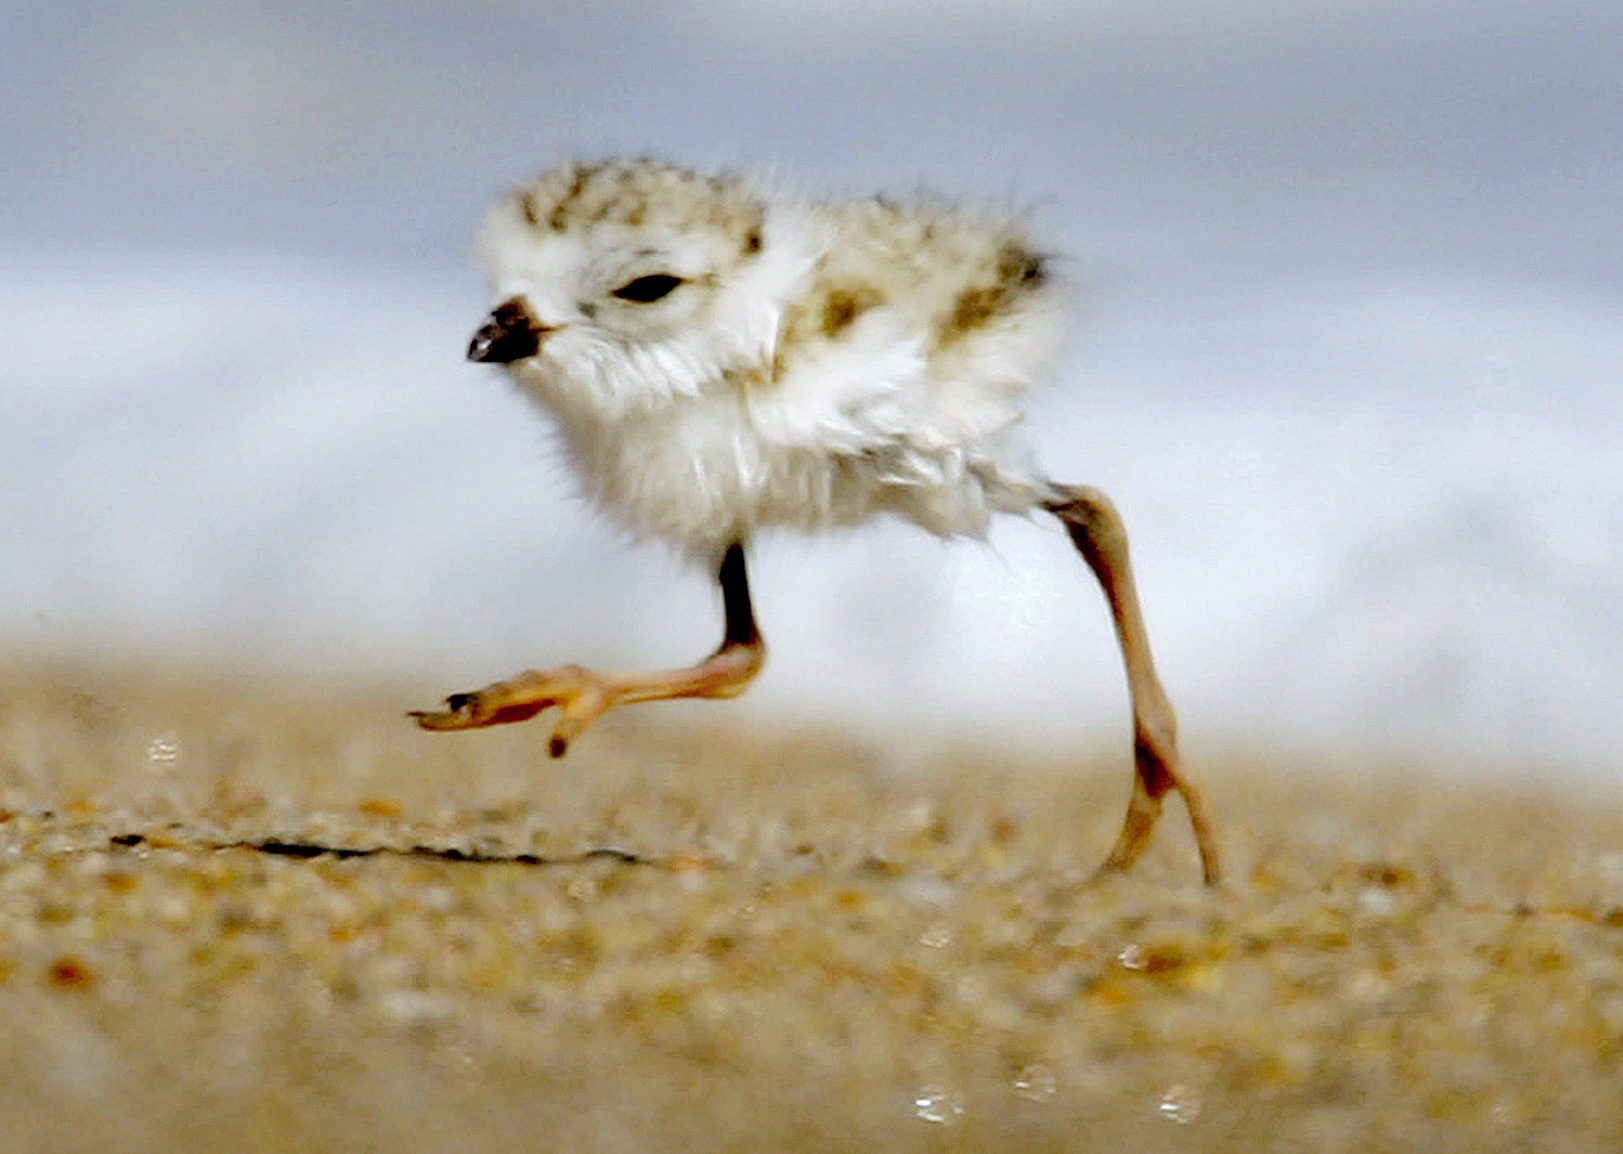 Get Ready For ‘Chick Mania’: Habitat Improves For Endangered Shorebird As Lake Levels Drop